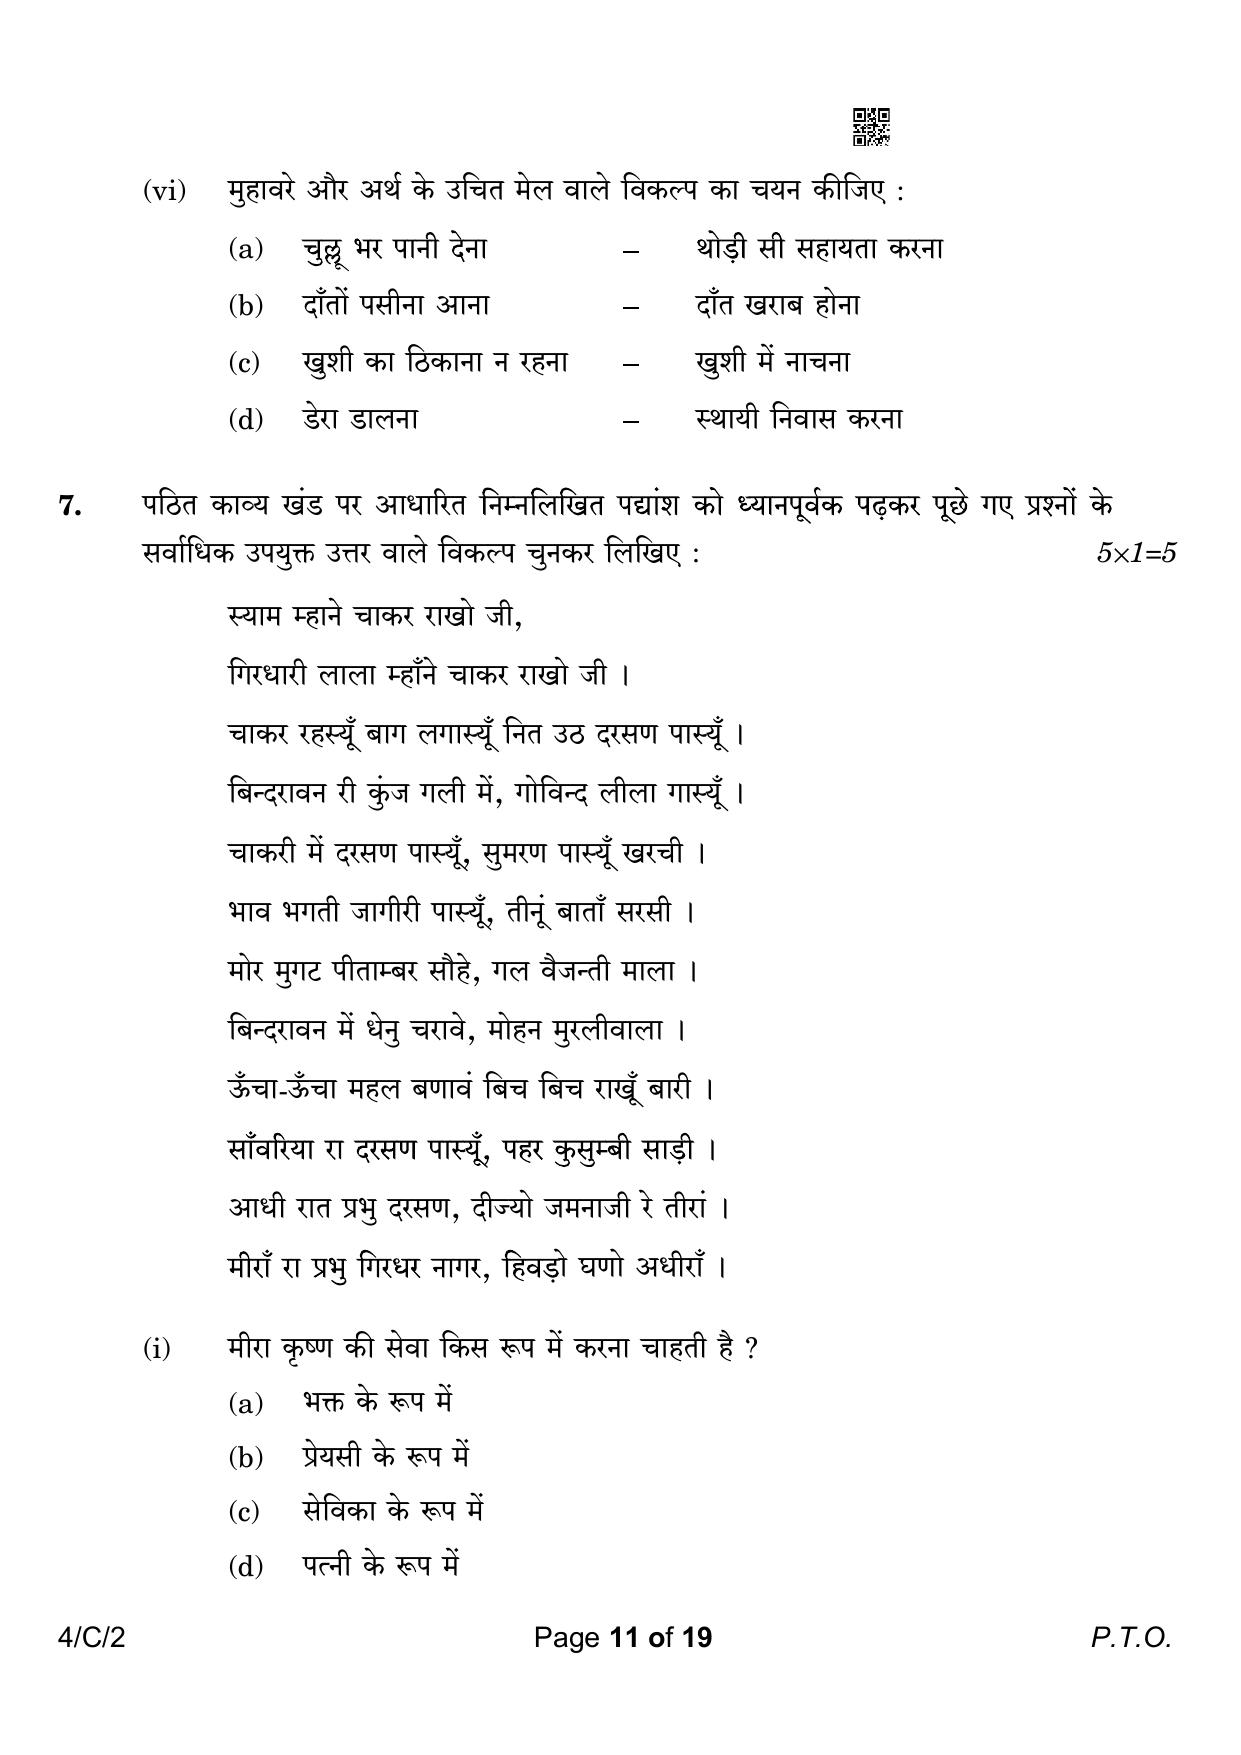 CBSE Class 10 4-2 Hindi B 2023 (Compartment) Question Paper - Page 11